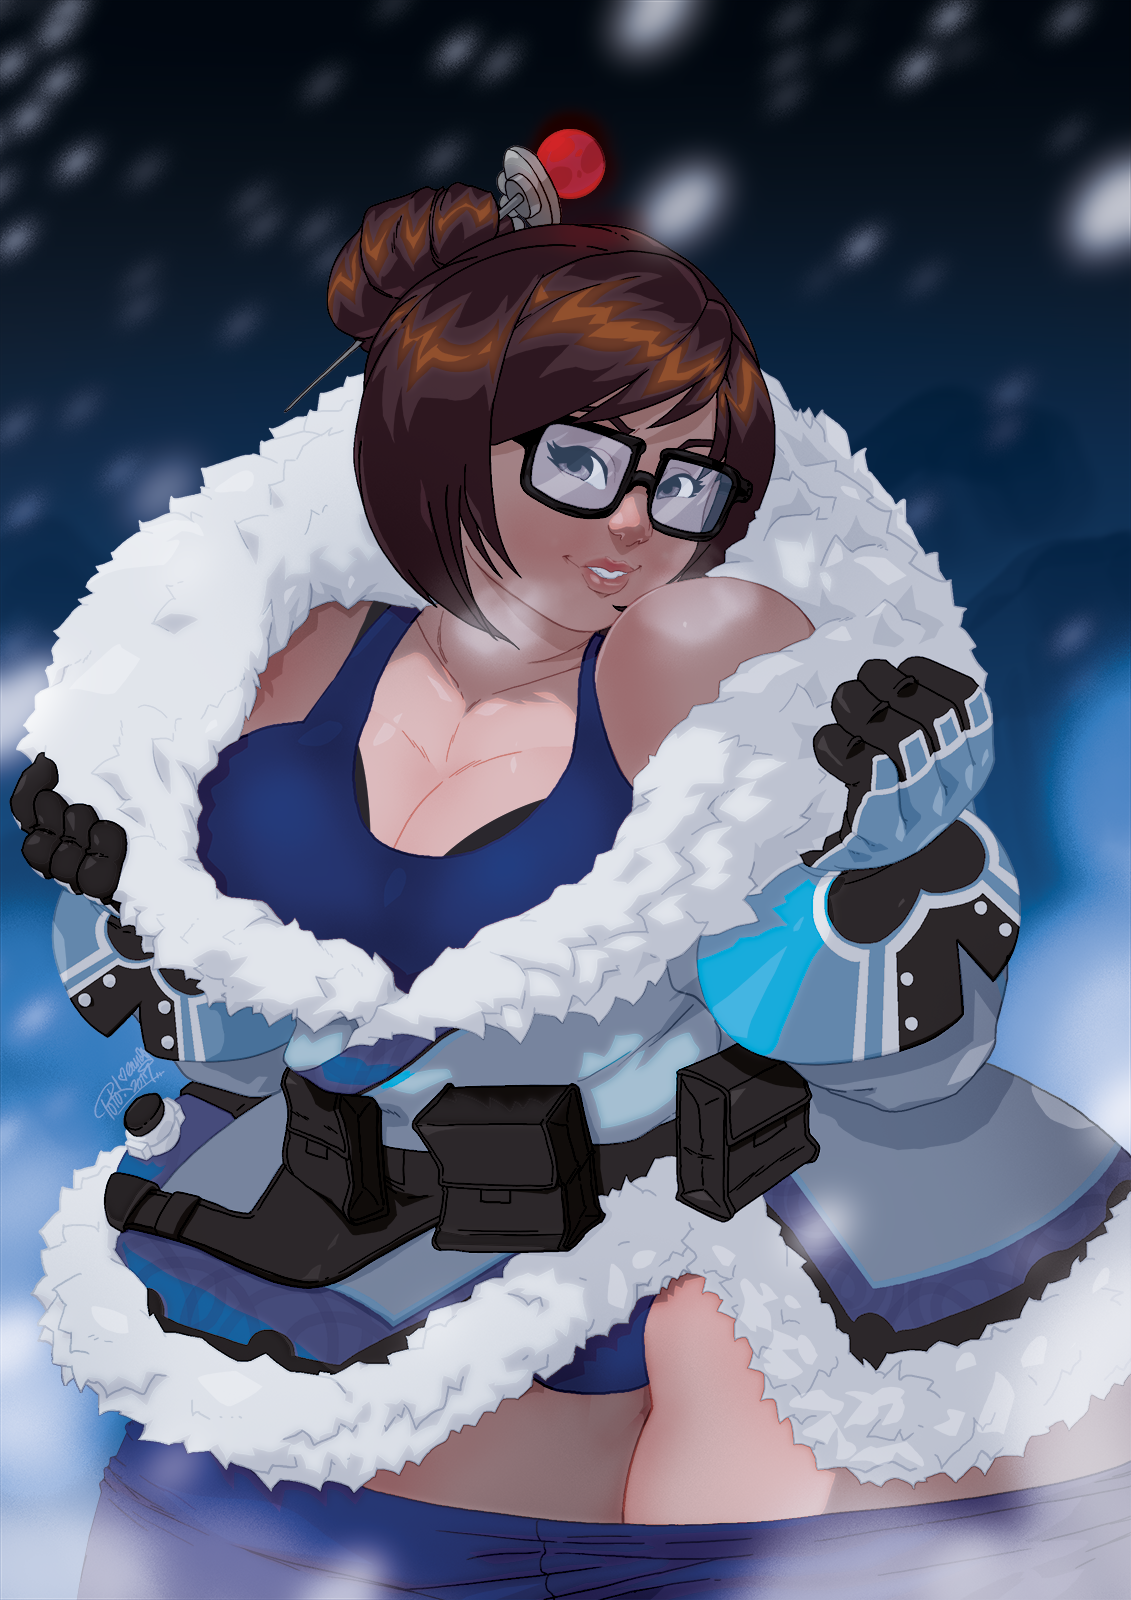 tovio-rogers: another nerd for the patreon set. im a mei/d.va main in overwatch so